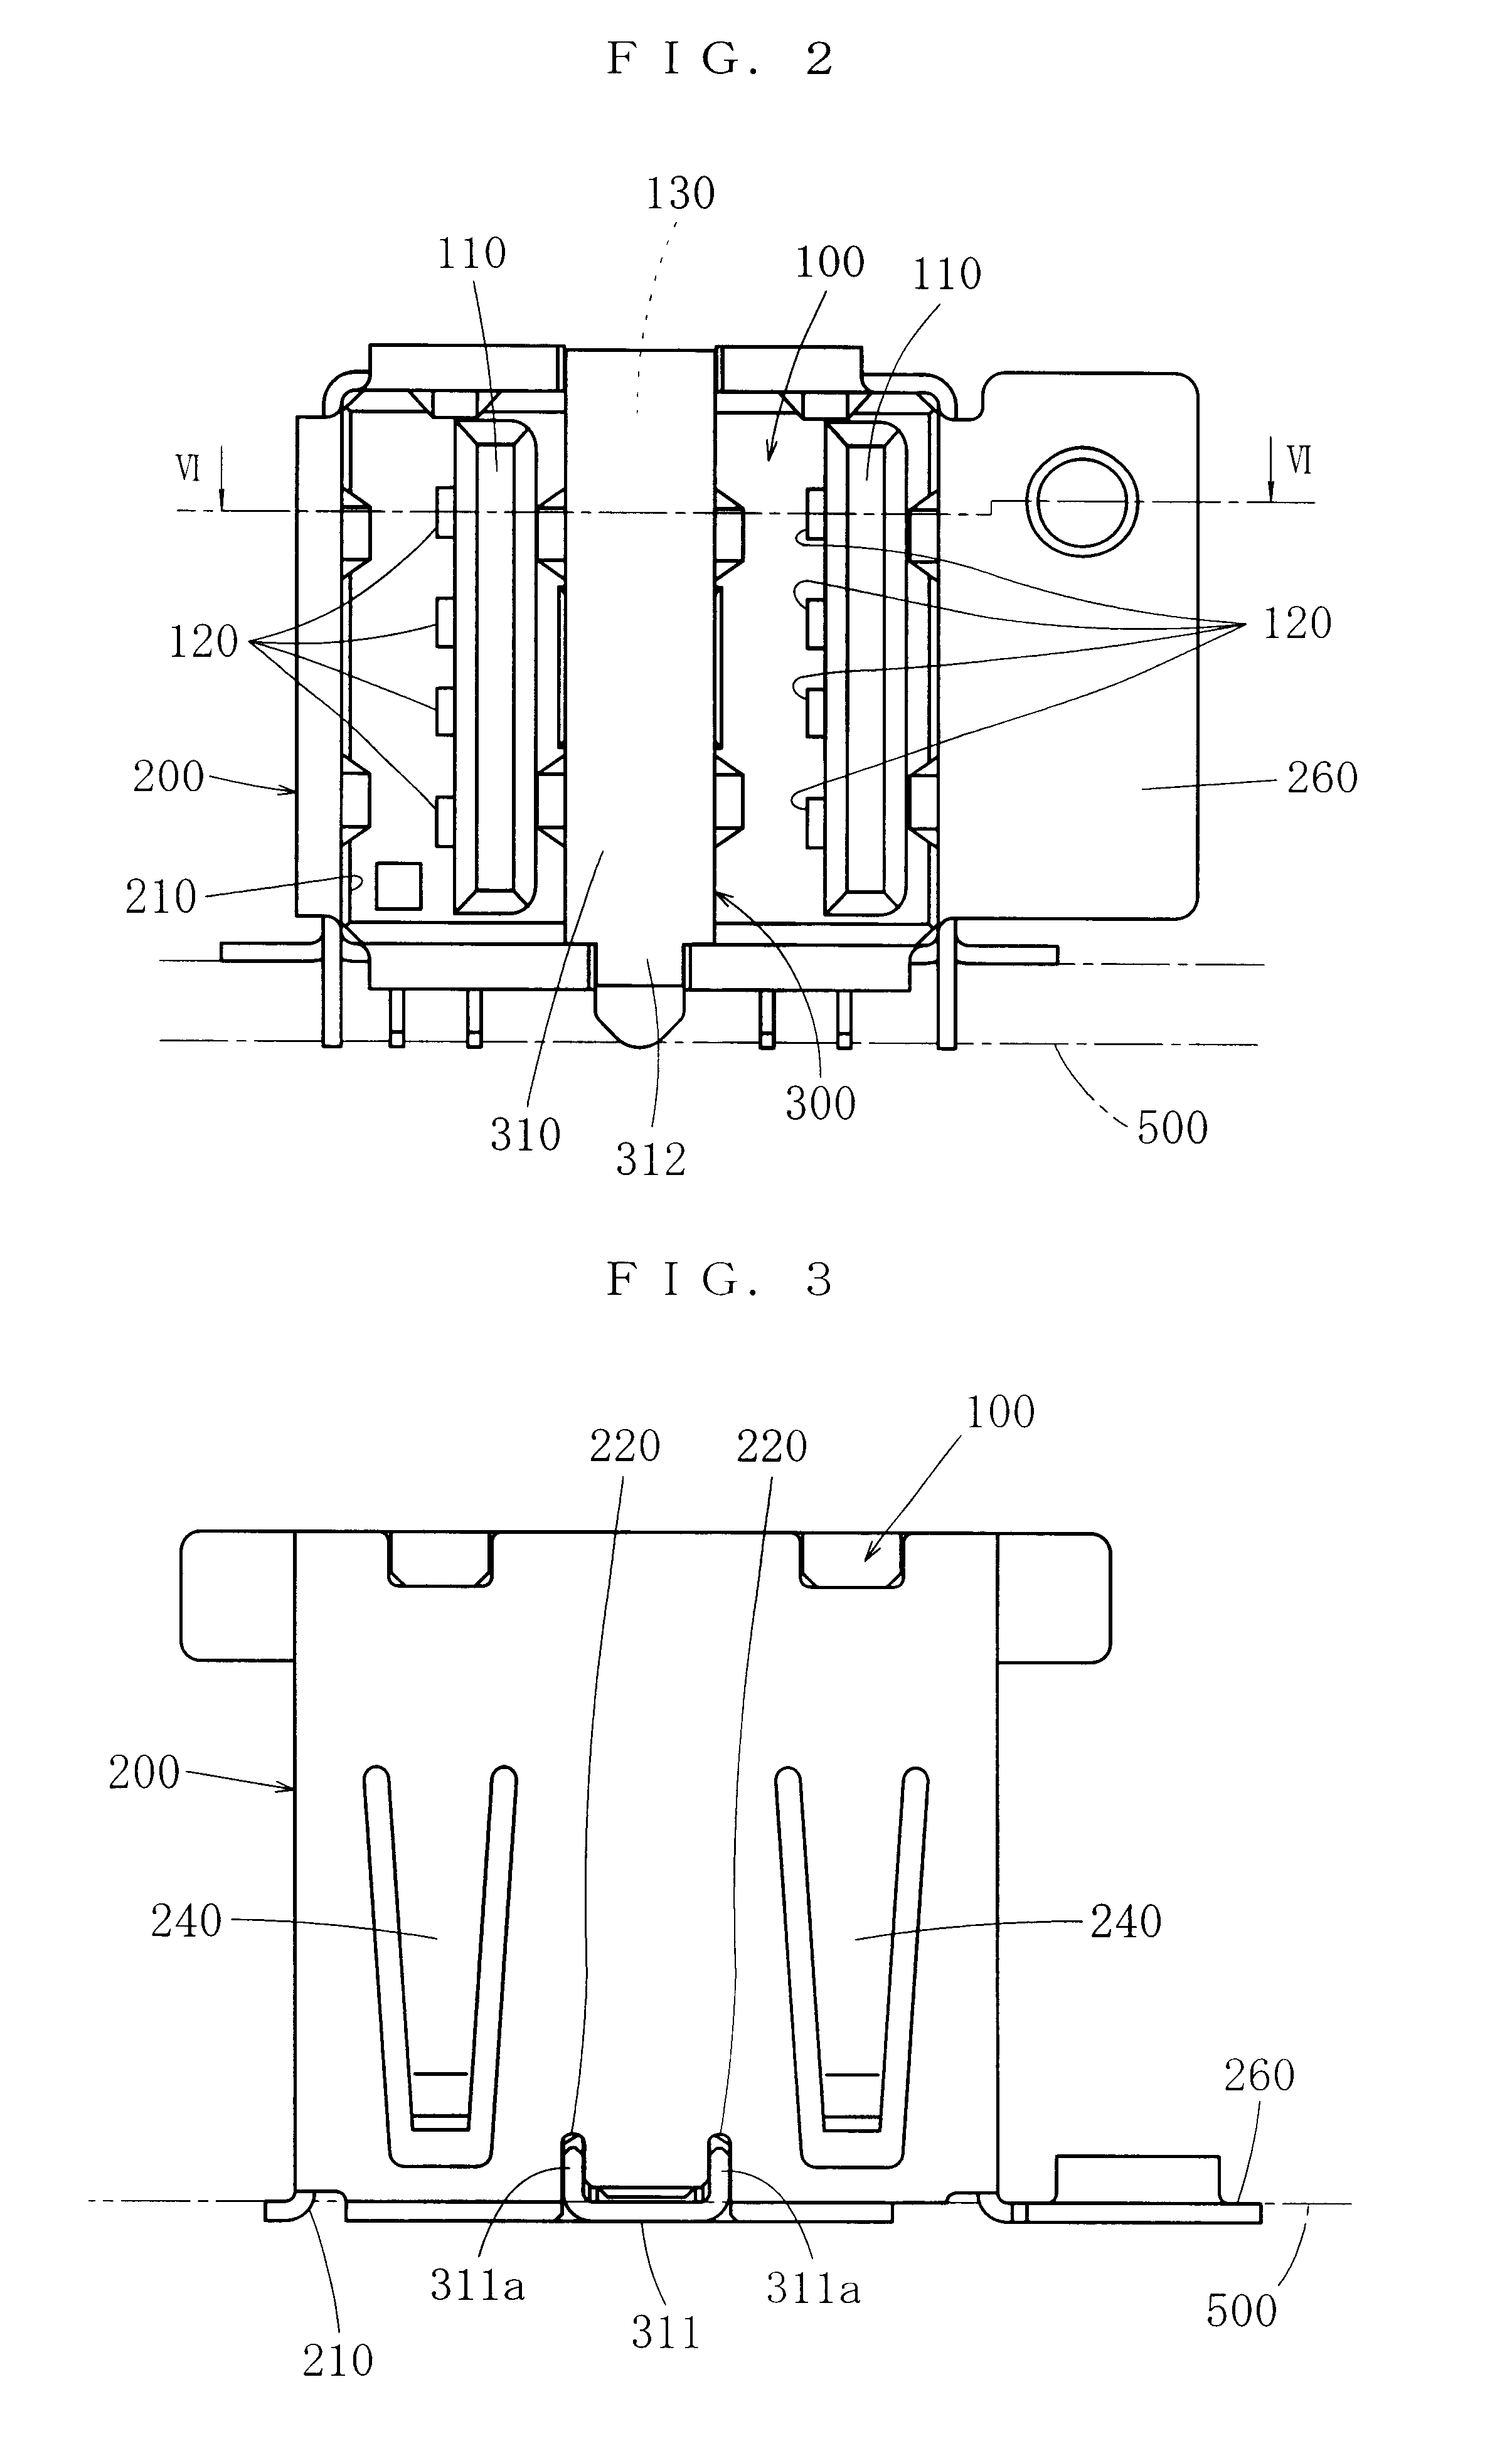 Electric connector having conductive inner and outer shells securely fastened to each other